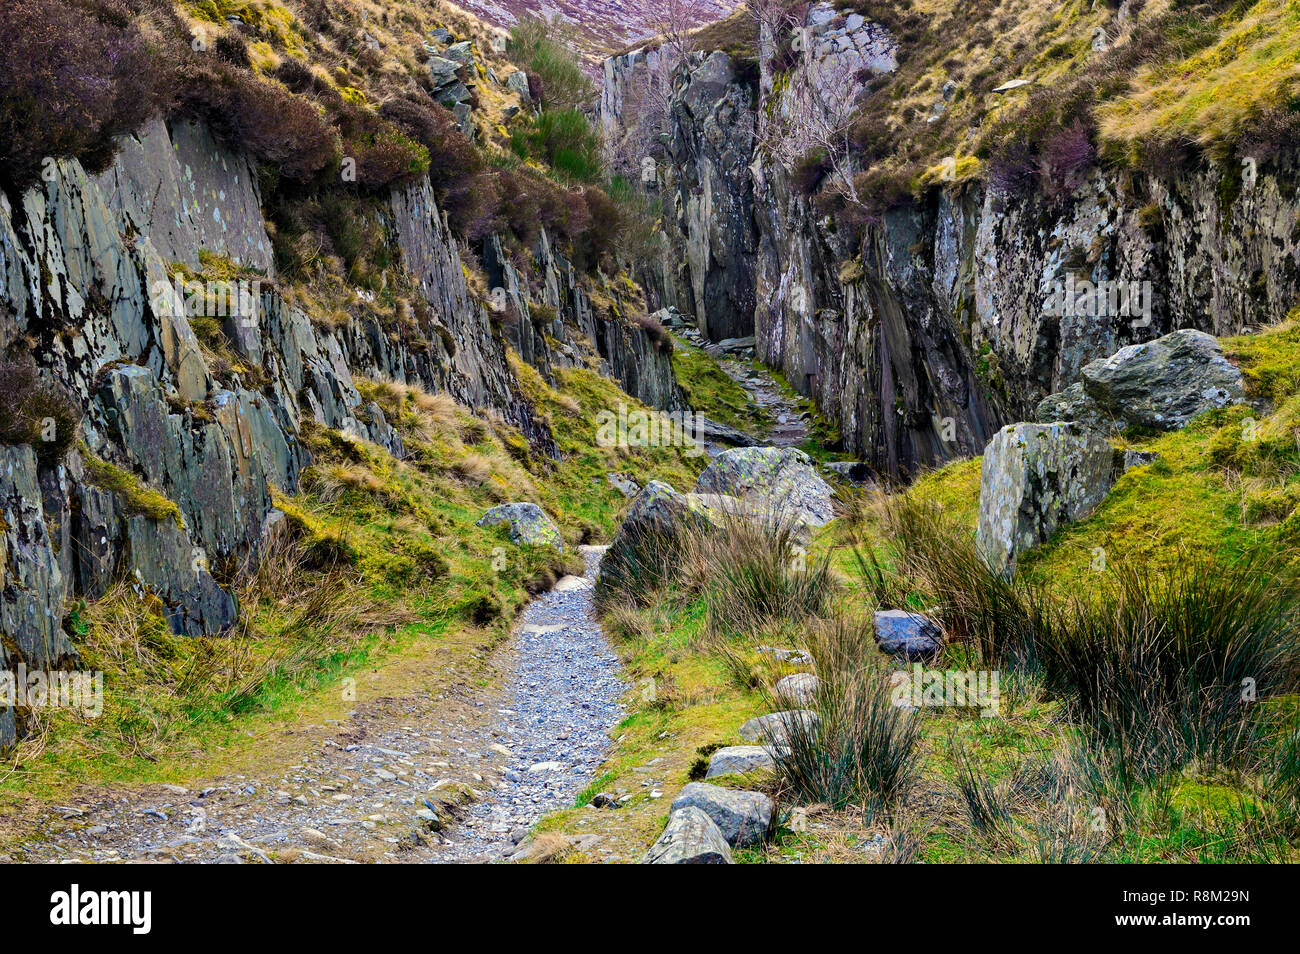 A view of a narrow winding footpath through the rugged landscape of the Snowdonia National Park. Stock Photo